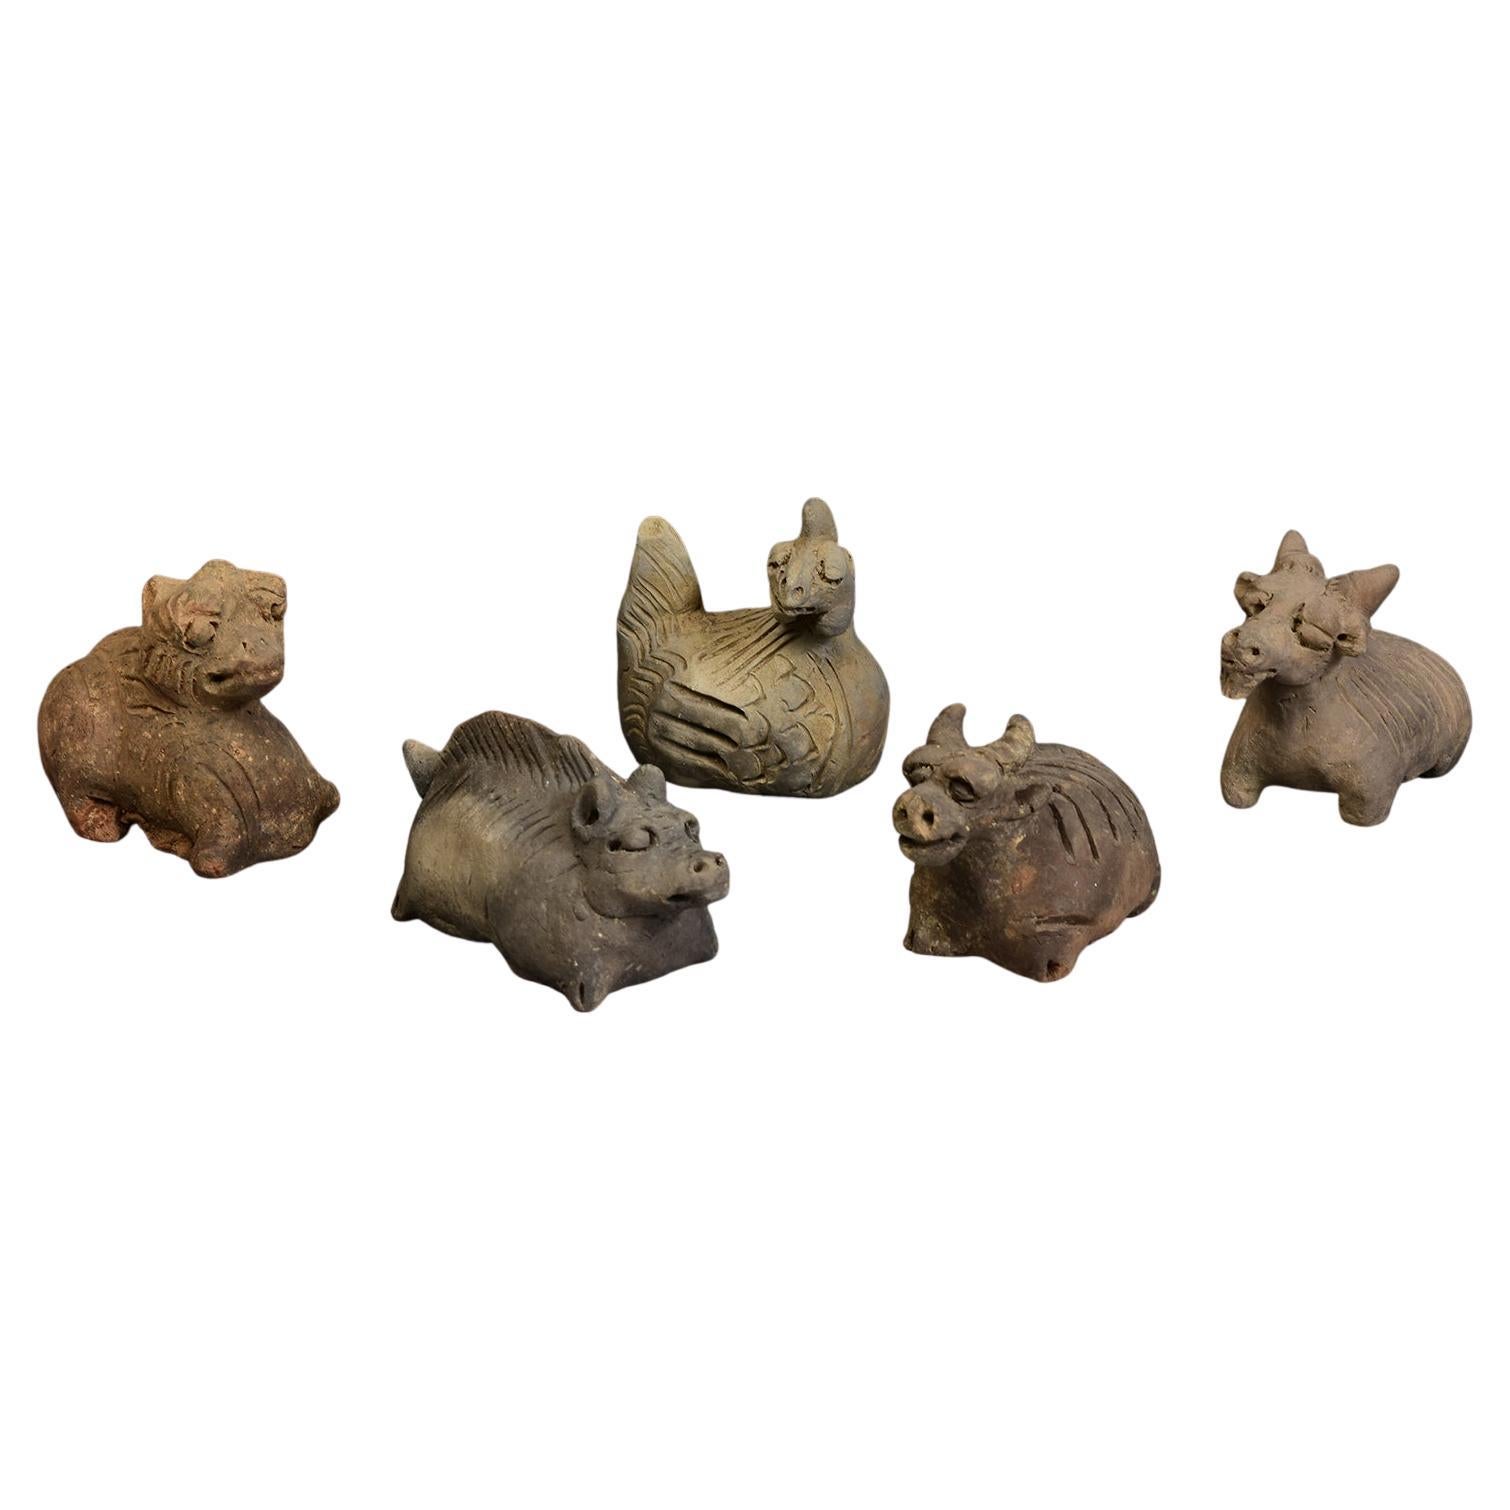 Yuan Dynasty, A Set of Rare Antique Chinese Pottery Animals